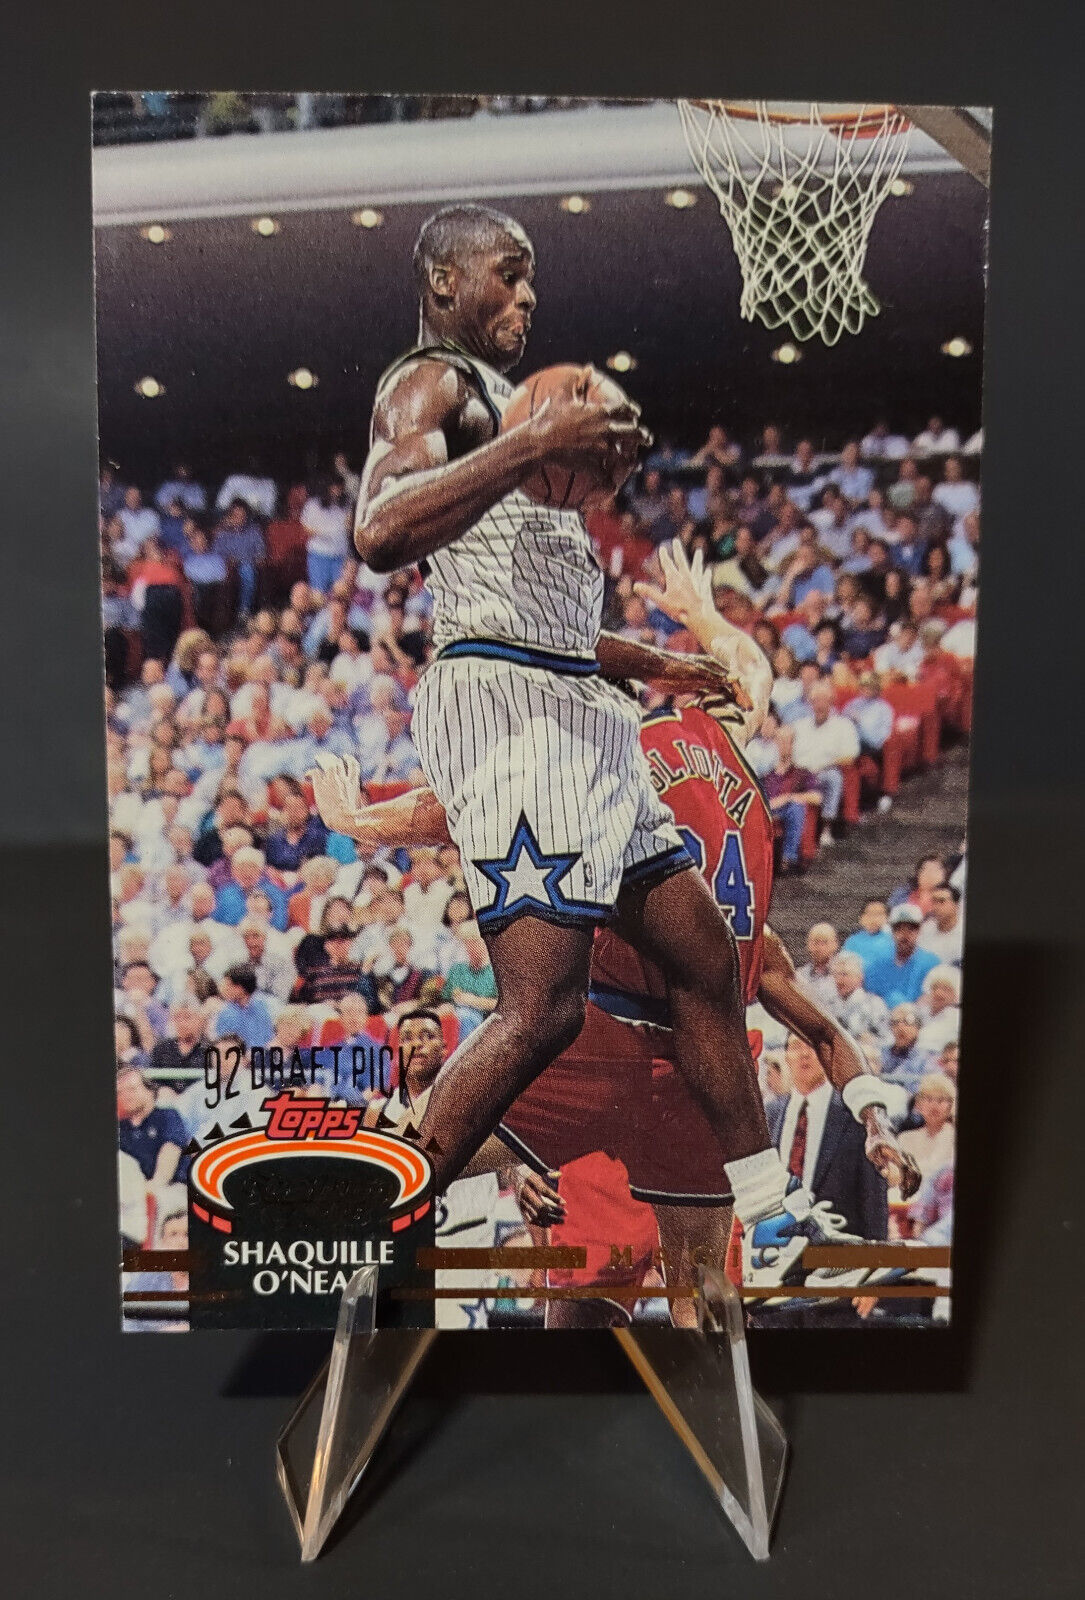 1992-93 Topps Stadium Club - Members Only #247 Shaquille O'Neal (RC)